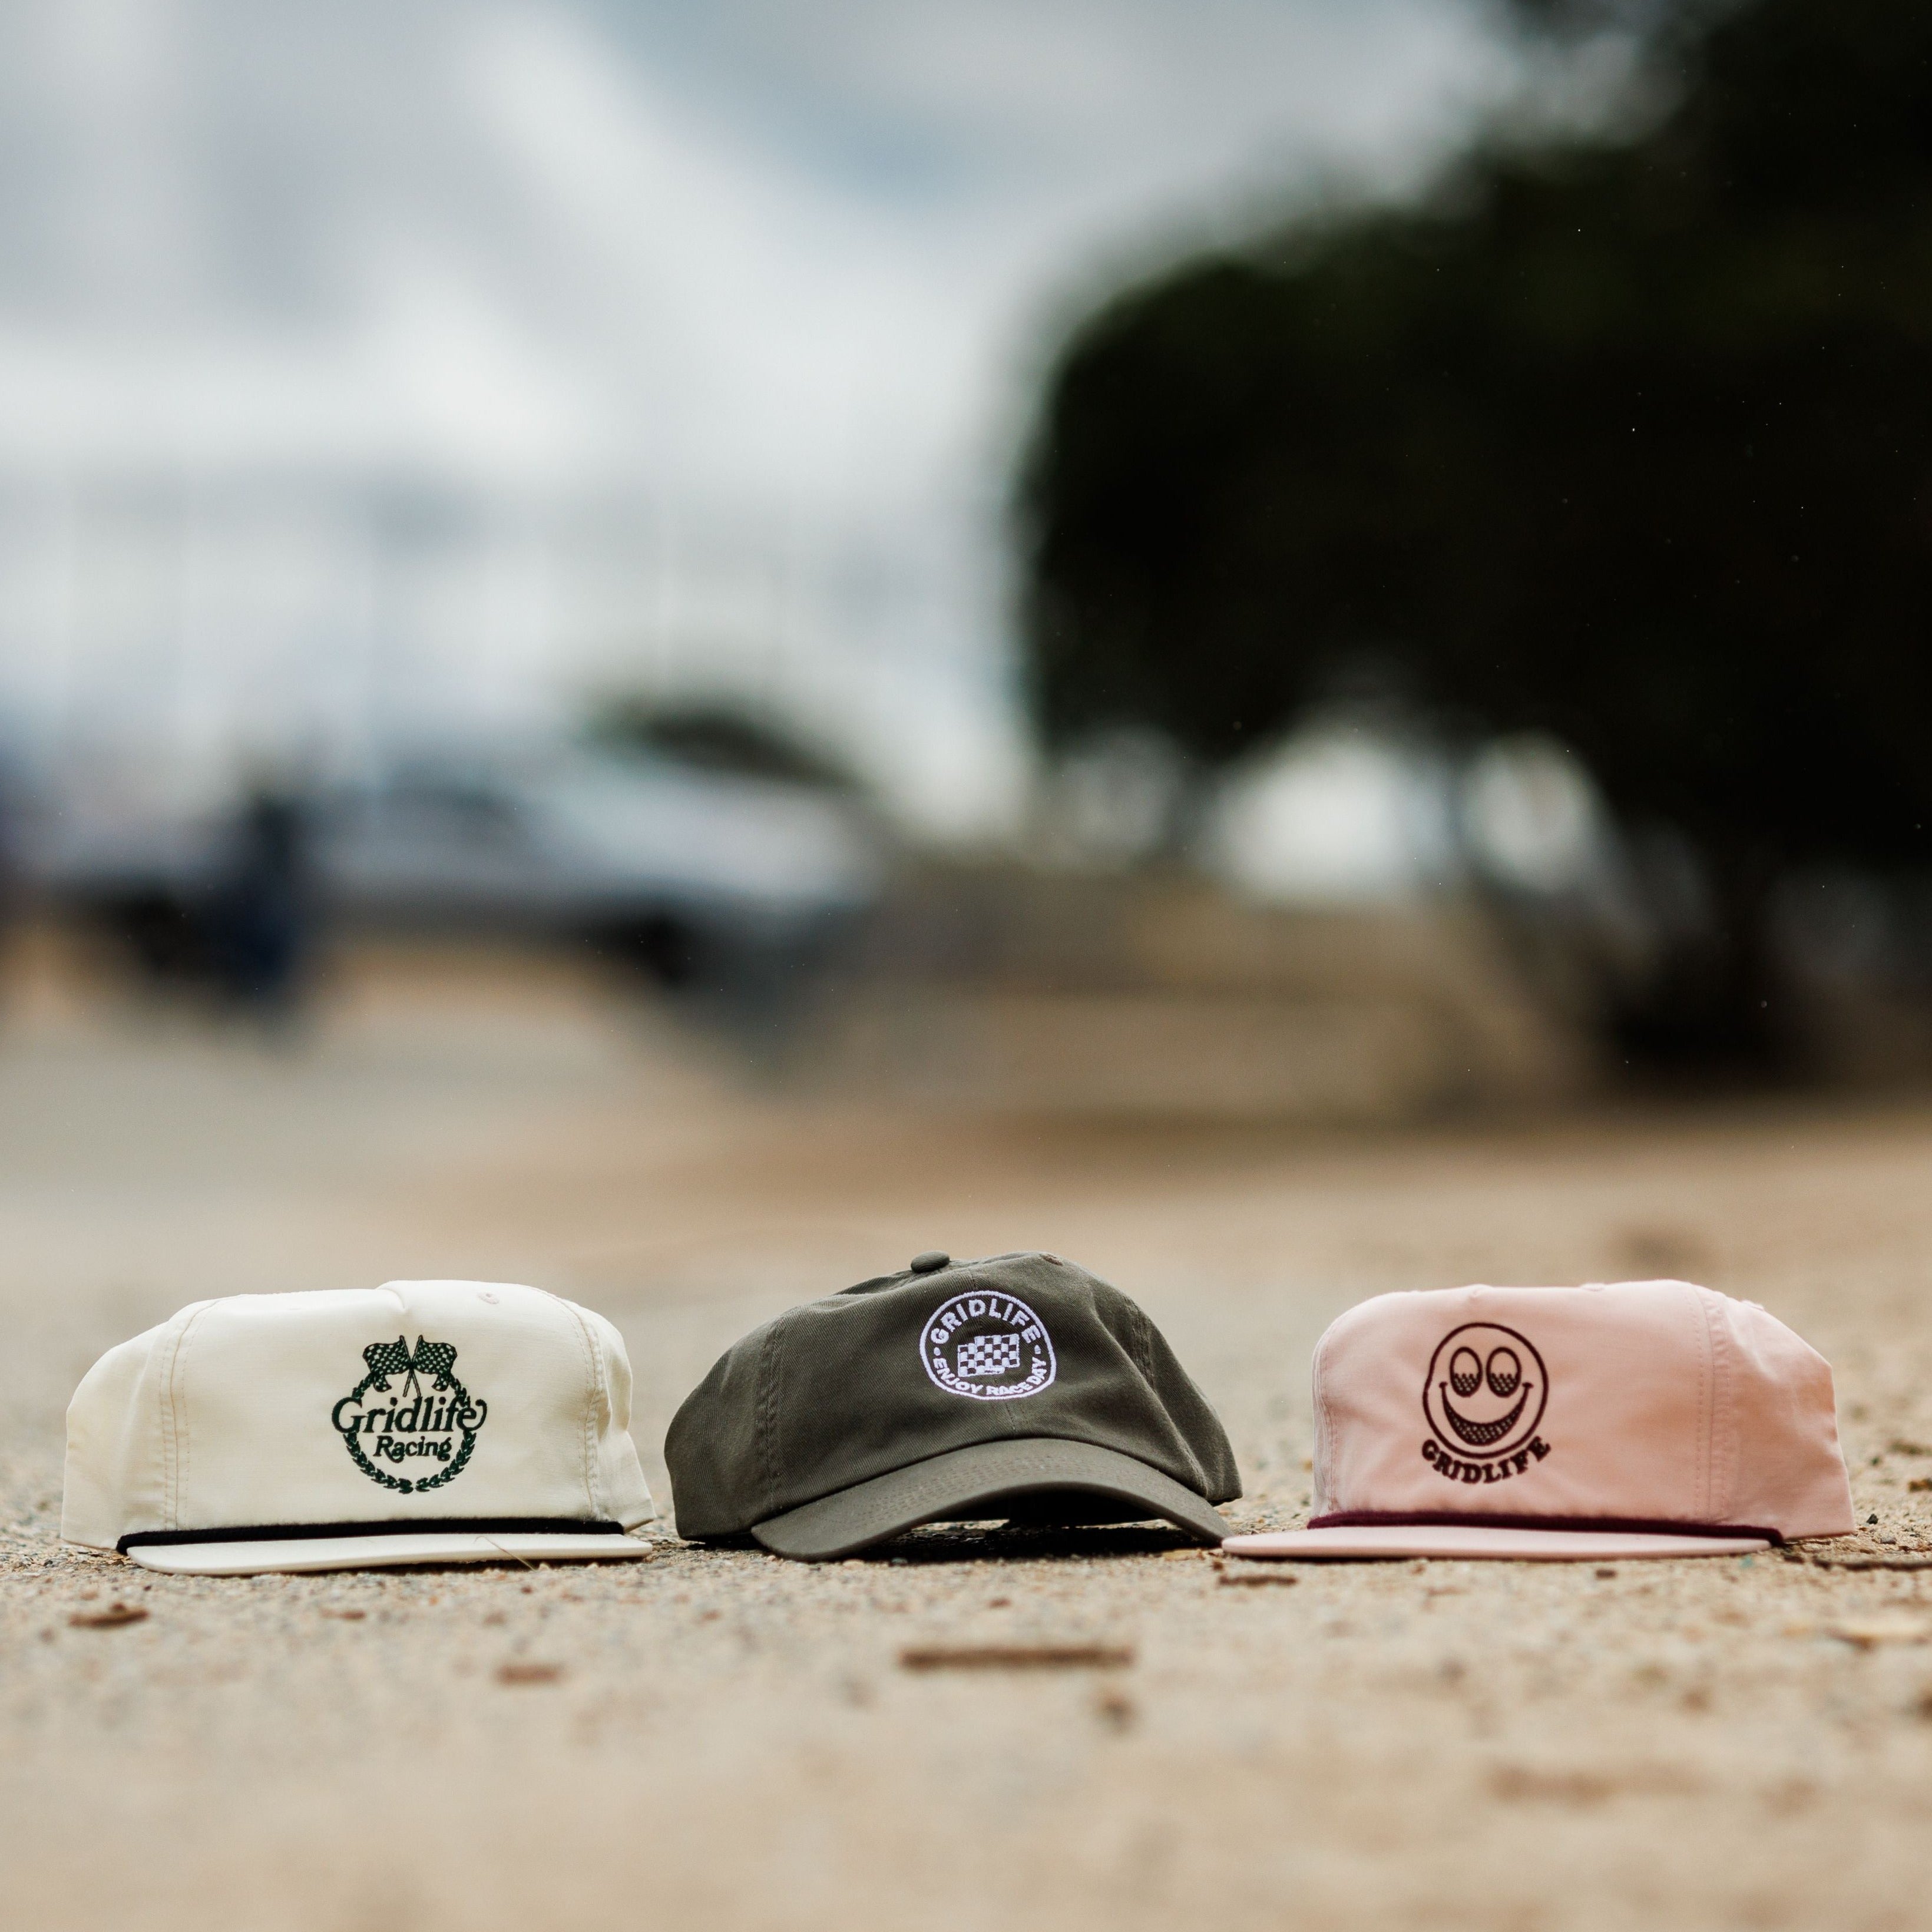 GRIDLIFE enjoy race dad hat with other GRIDLIFE hats